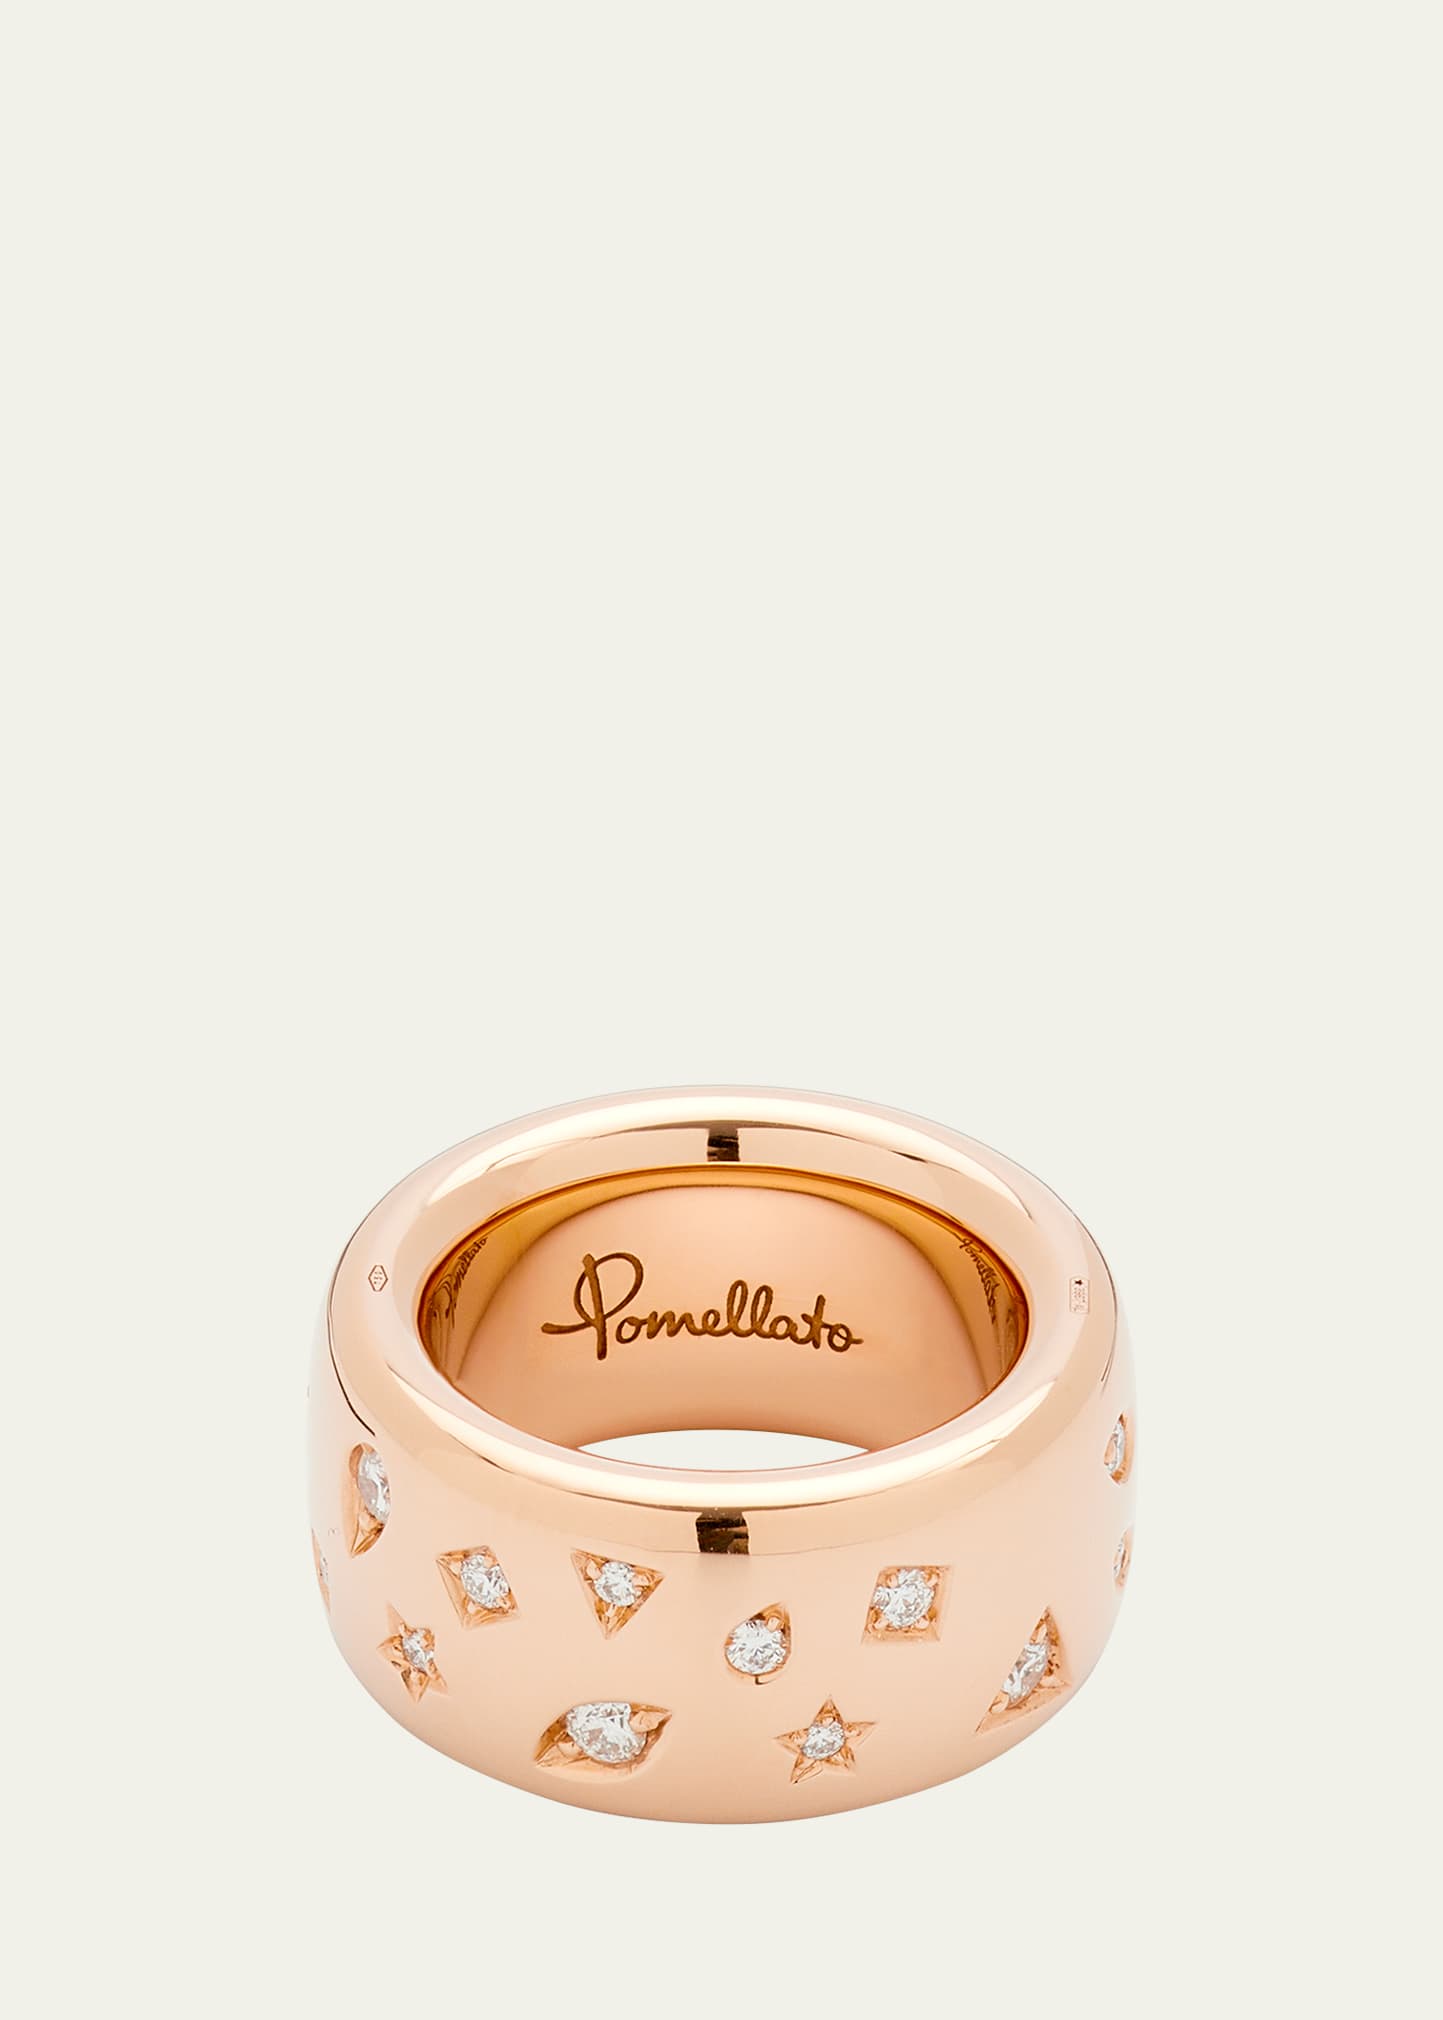 18k Rose Gold ICONICA Ring with Diamonds, 0.79 tcw